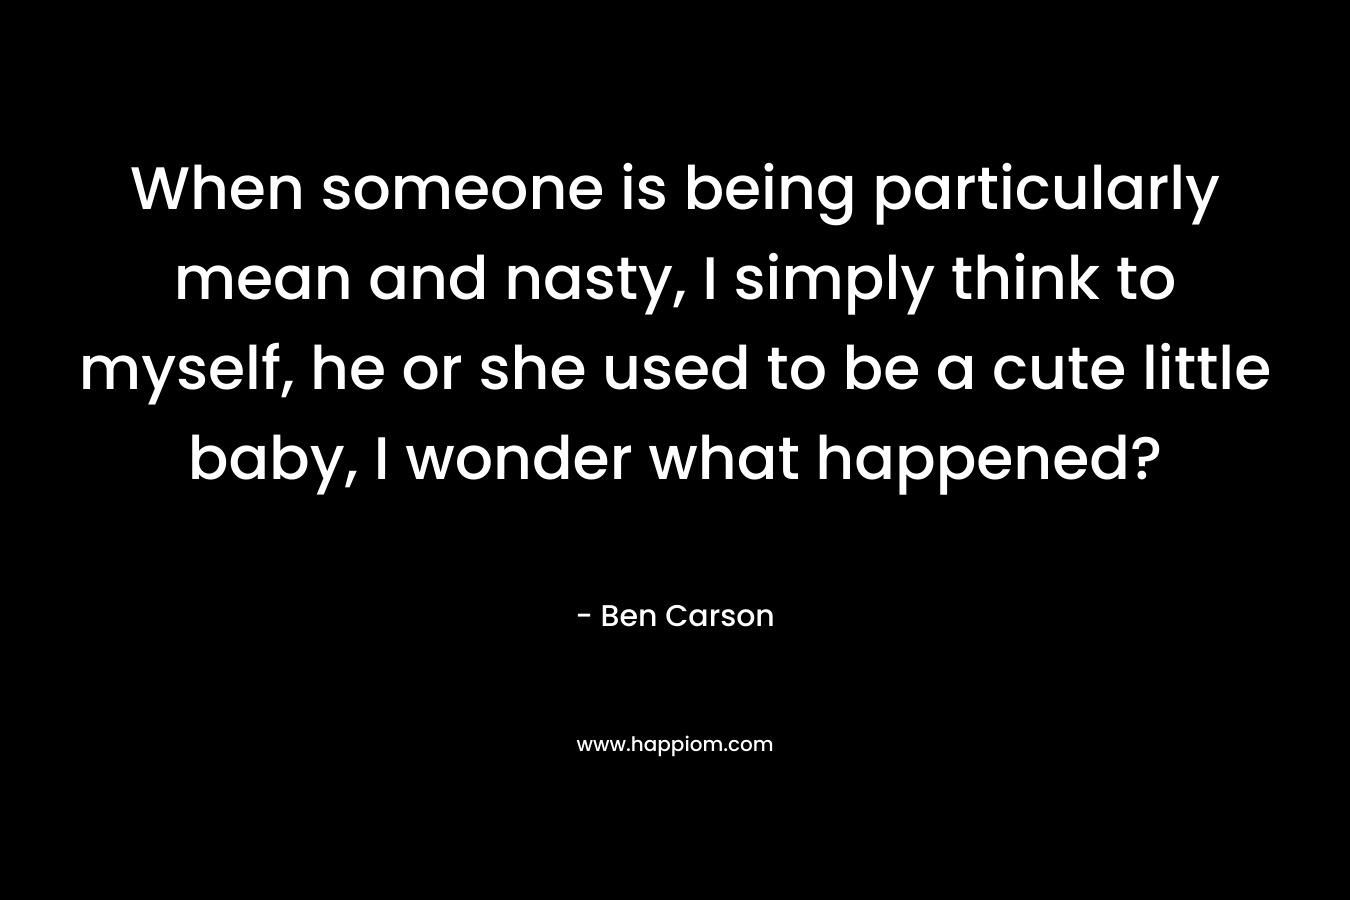 When someone is being particularly mean and nasty, I simply think to myself, he or she used to be a cute little baby, I wonder what happened? – Ben Carson